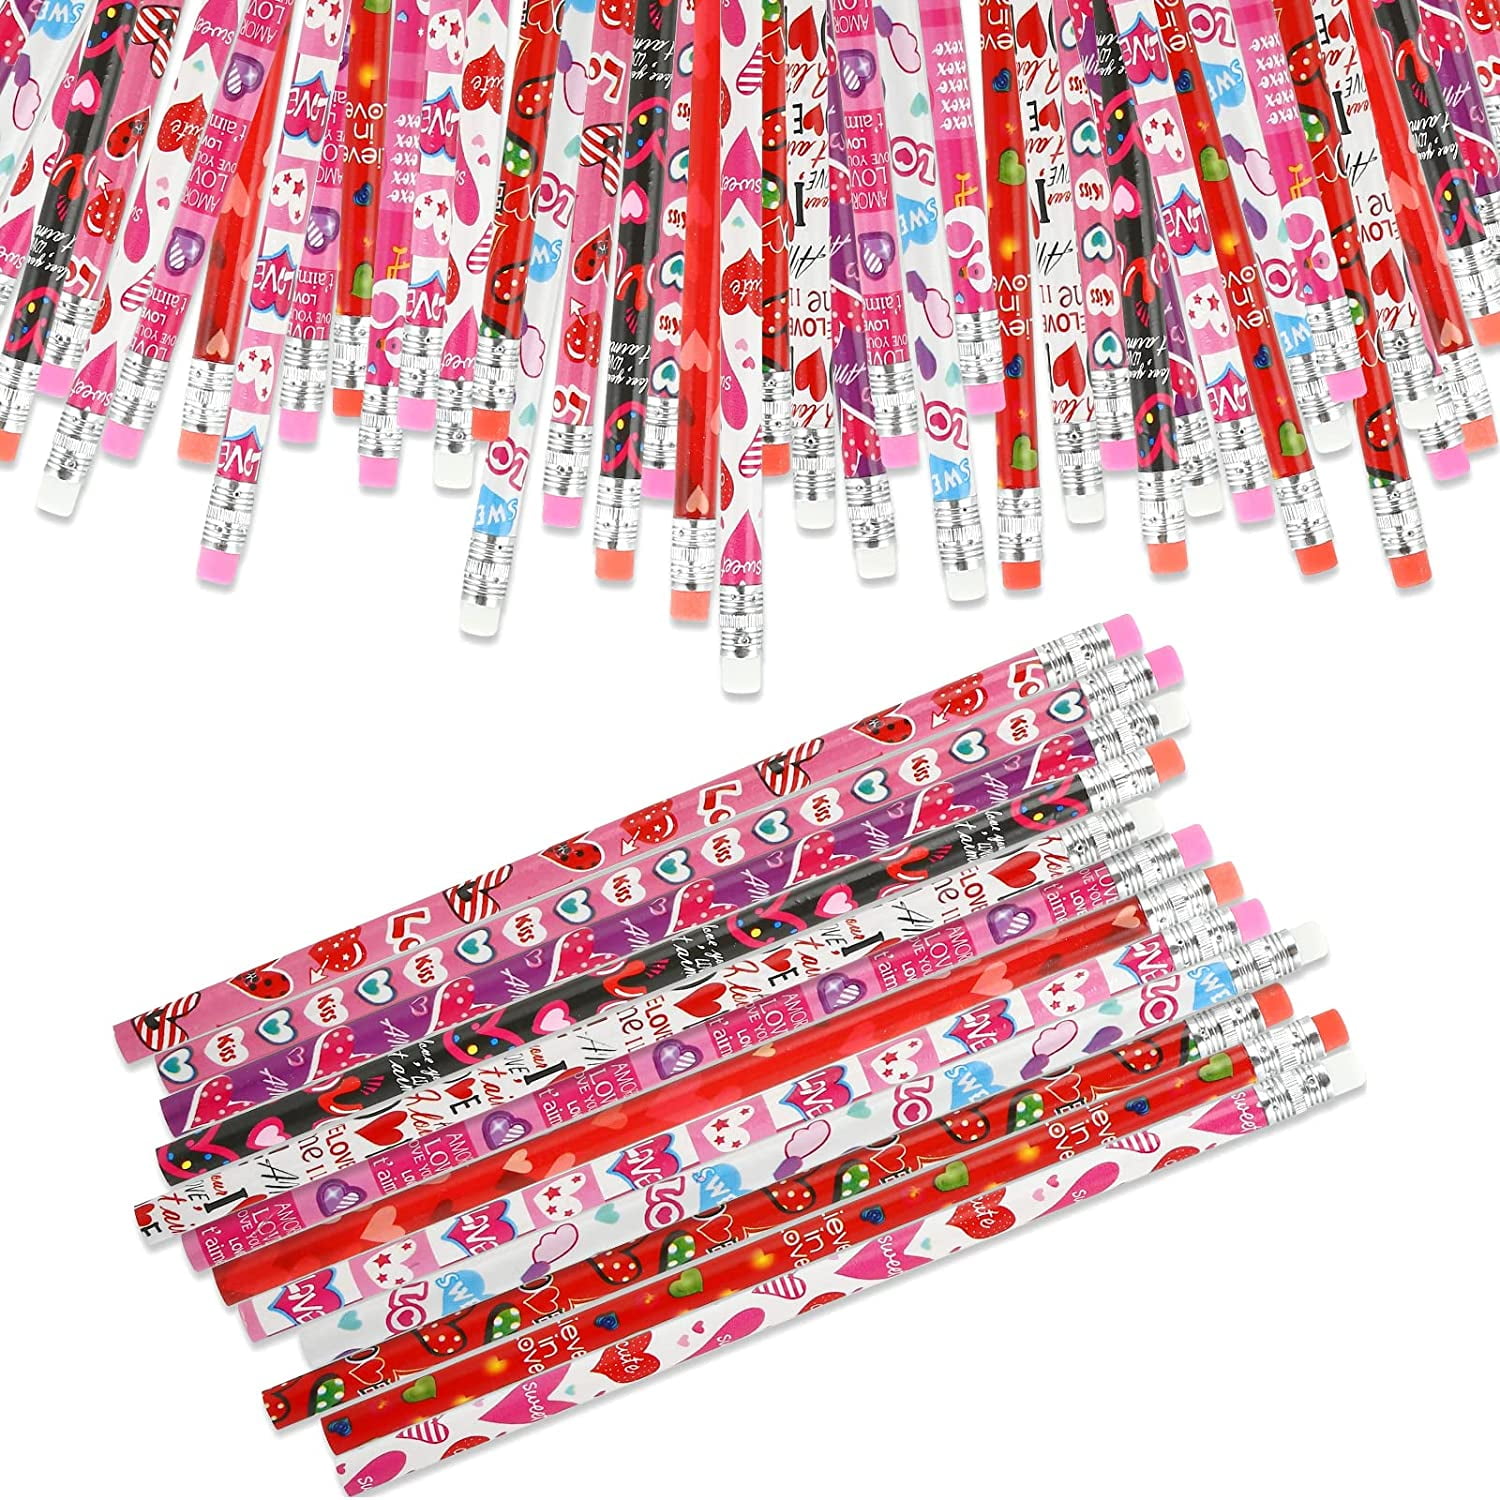 4E's Novelty 36 Pack - Valentines Pencils for Kids Bulk Valentines Day  Pencils for Classroom Gifts, Prizes for Party Favors, Stationary Gifts for